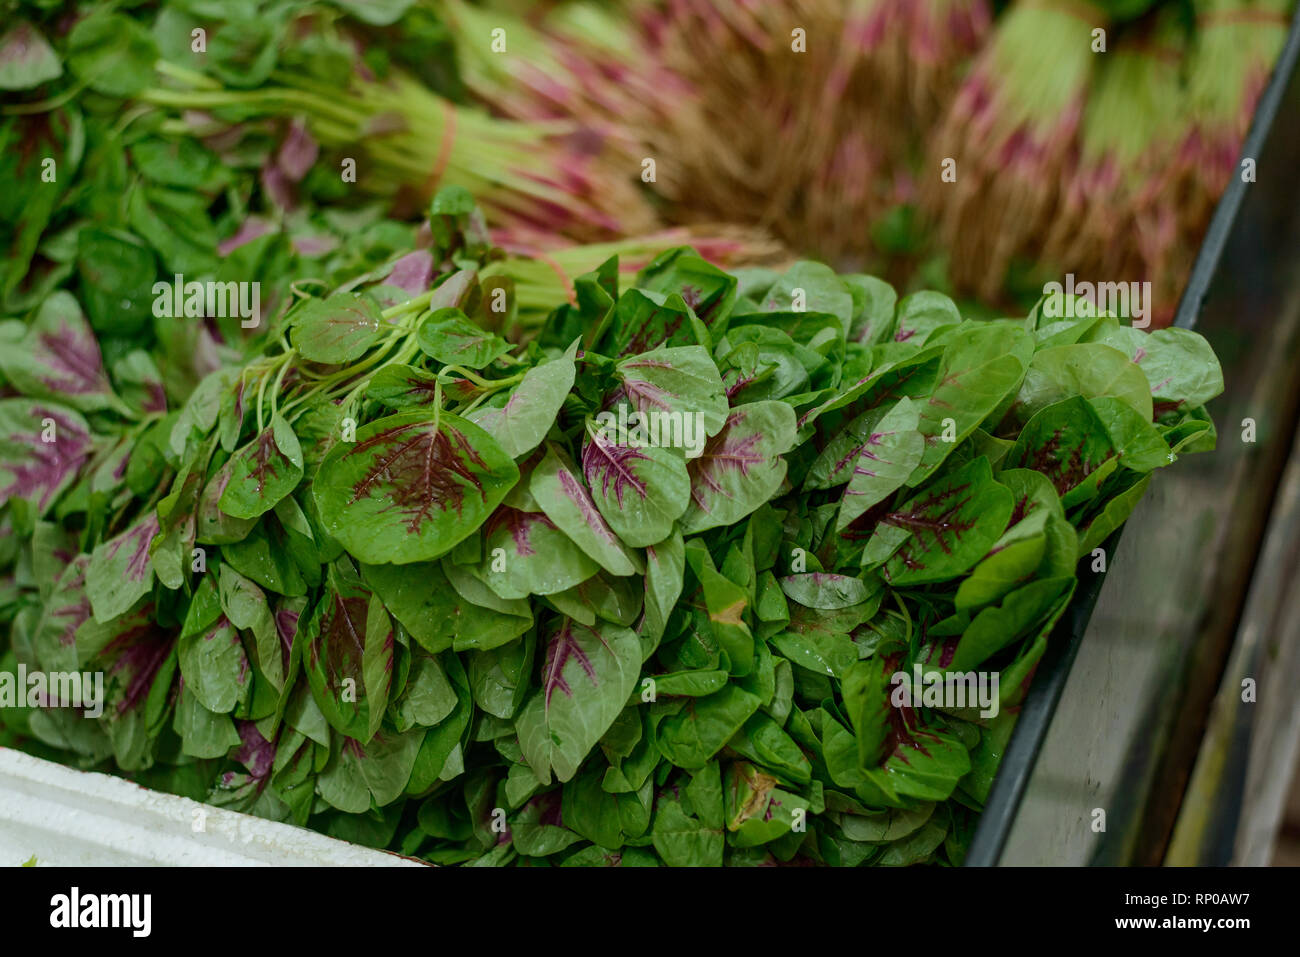 Pile of Chinese spinach Stock Photo